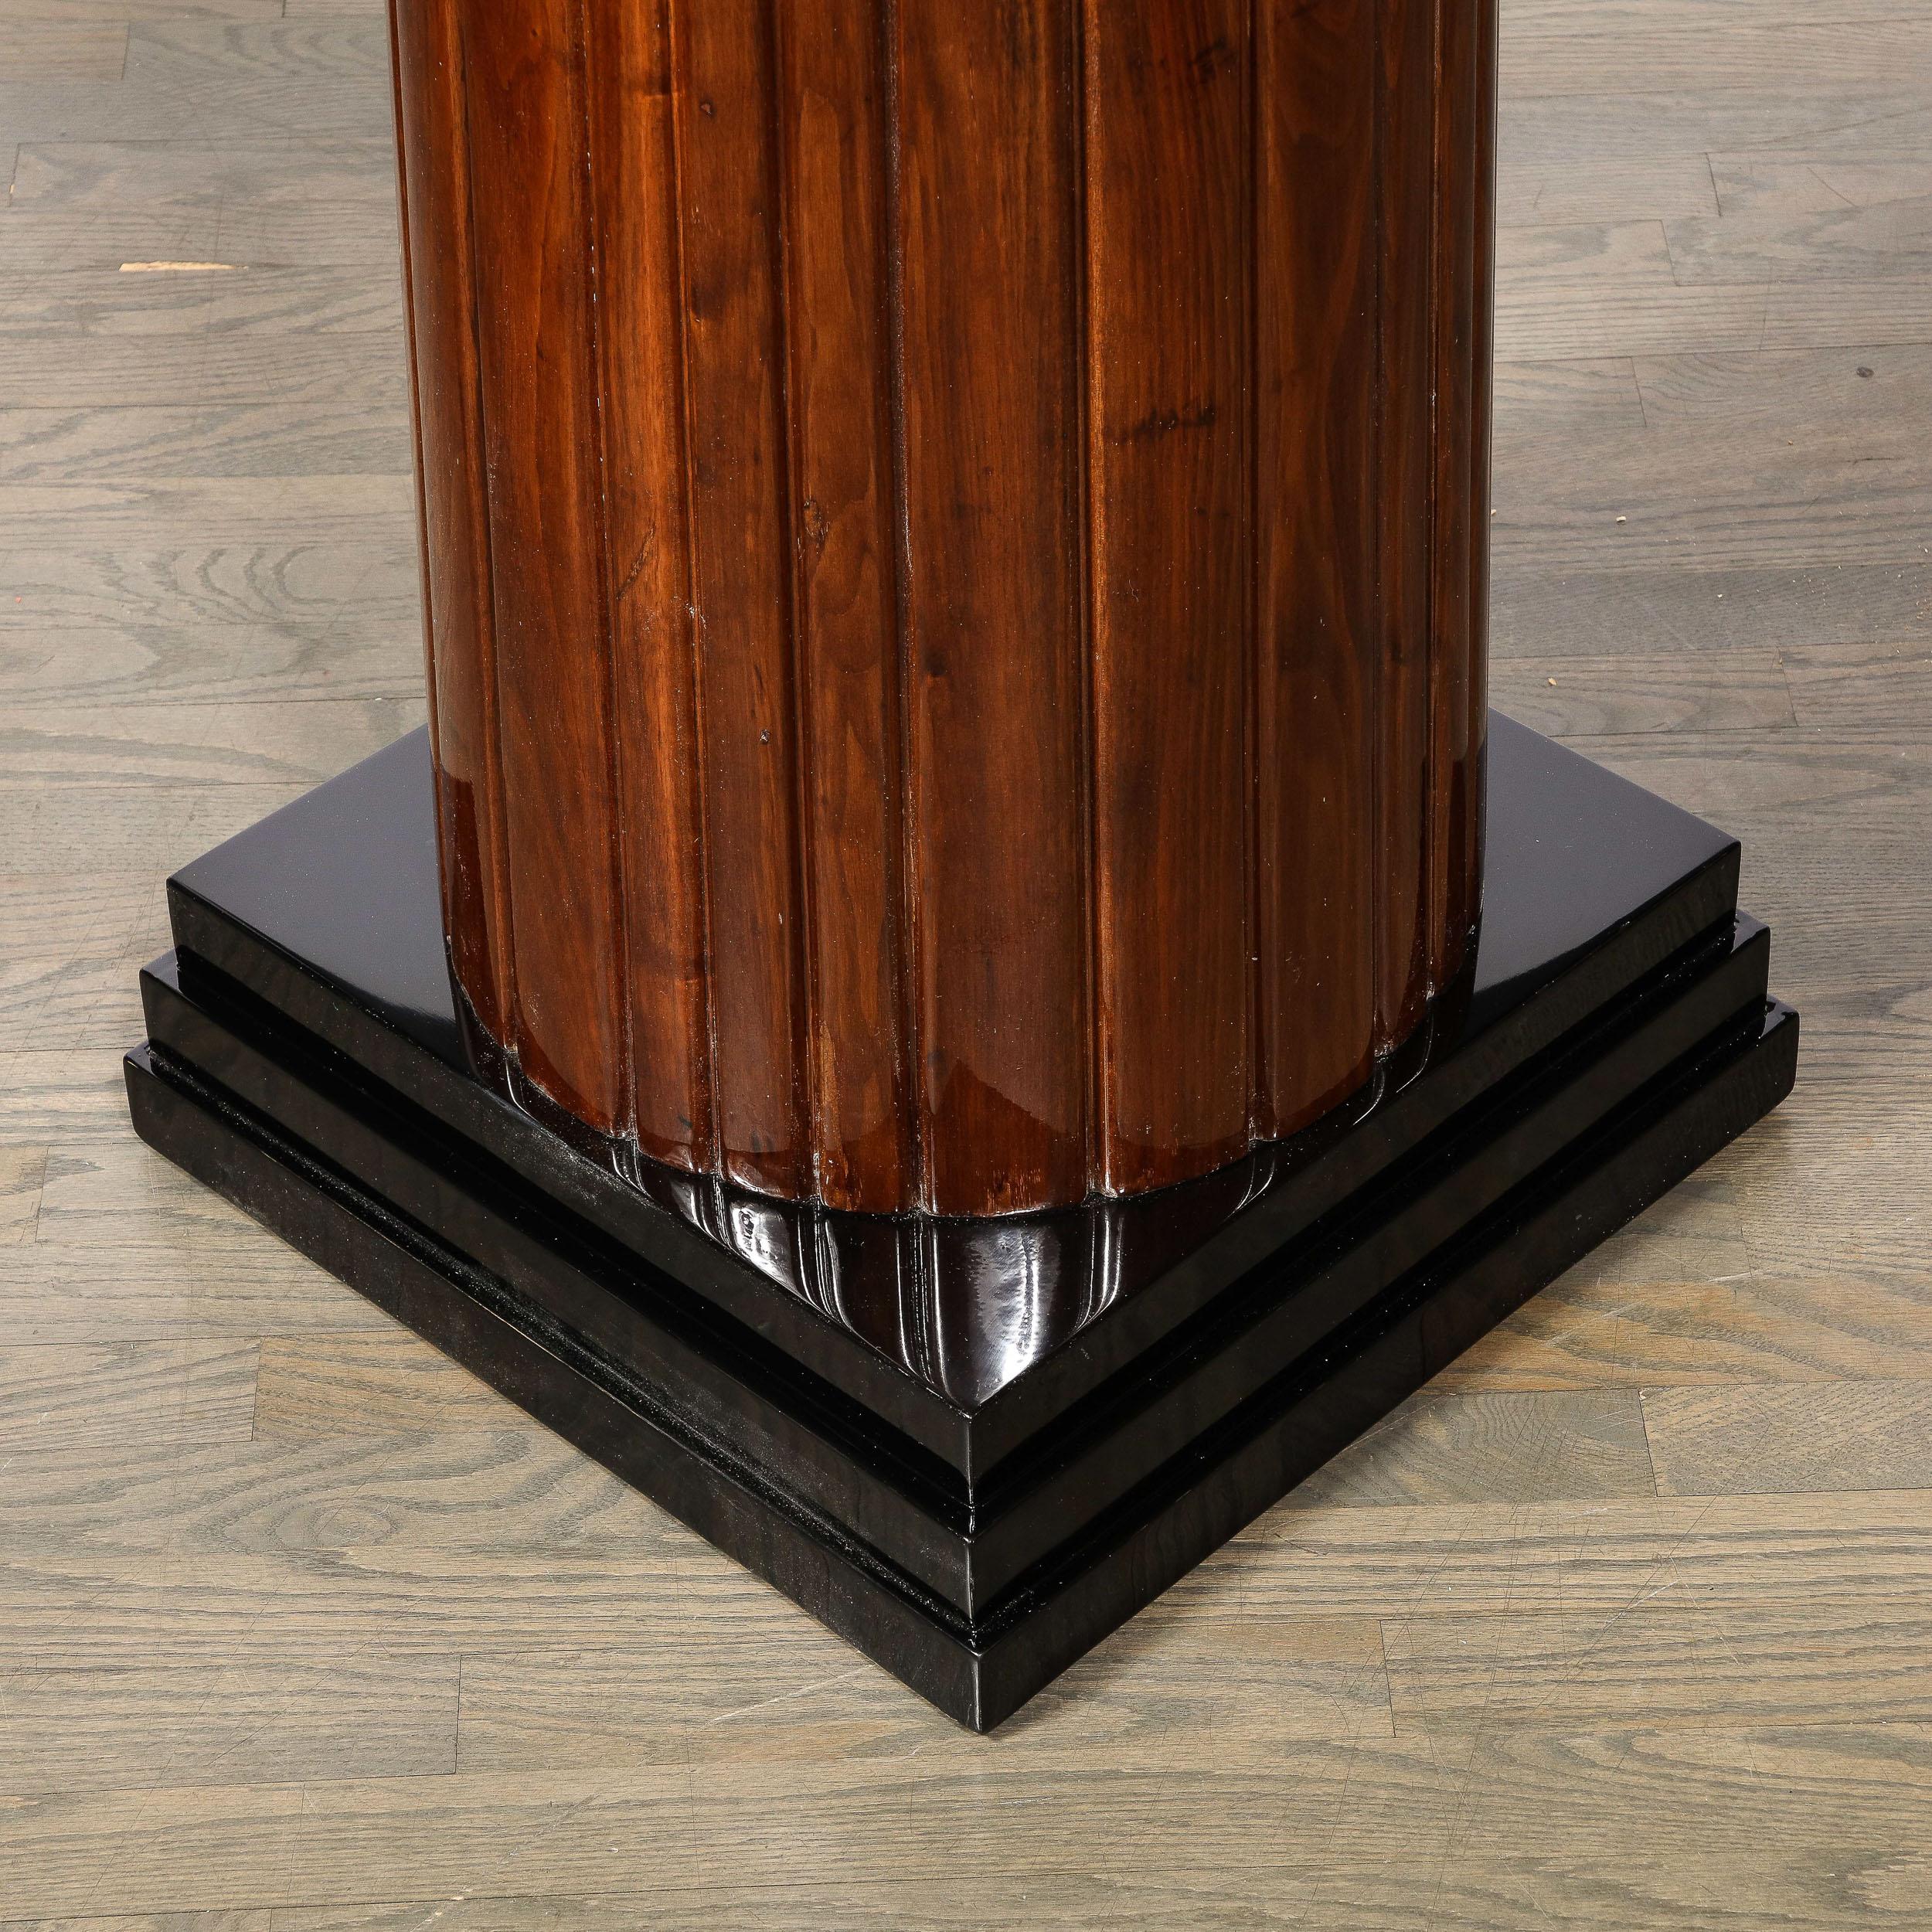 Monumental Art Deco Pedestal with Fluted Detailing in Walnut and Black Lacquer For Sale 7